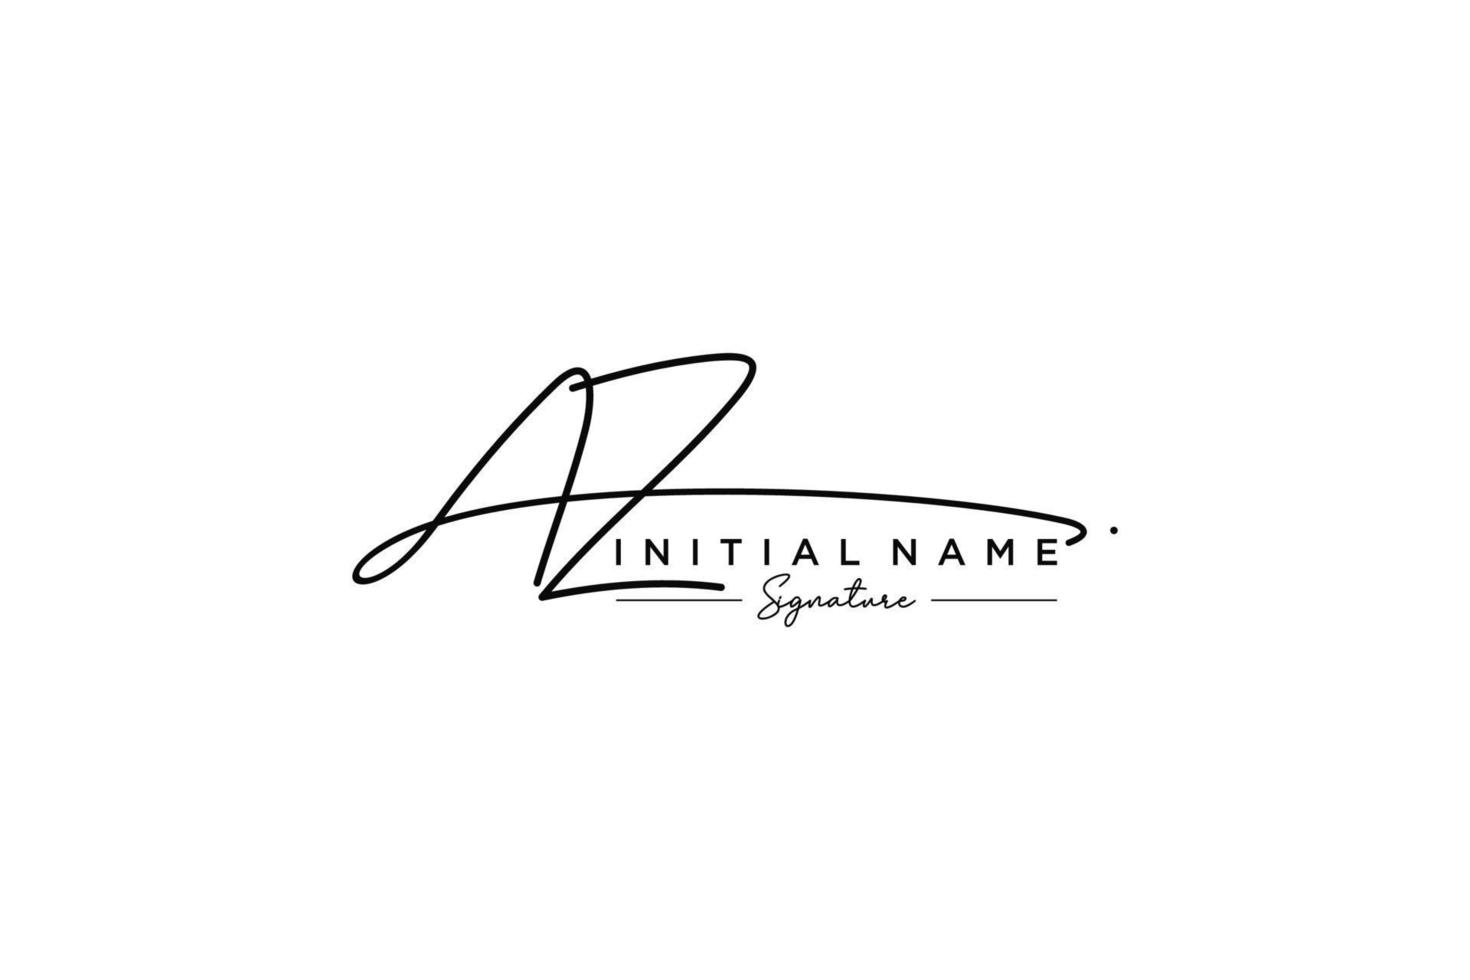 Initial AZ signature logo template vector. Hand drawn Calligraphy lettering Vector illustration.